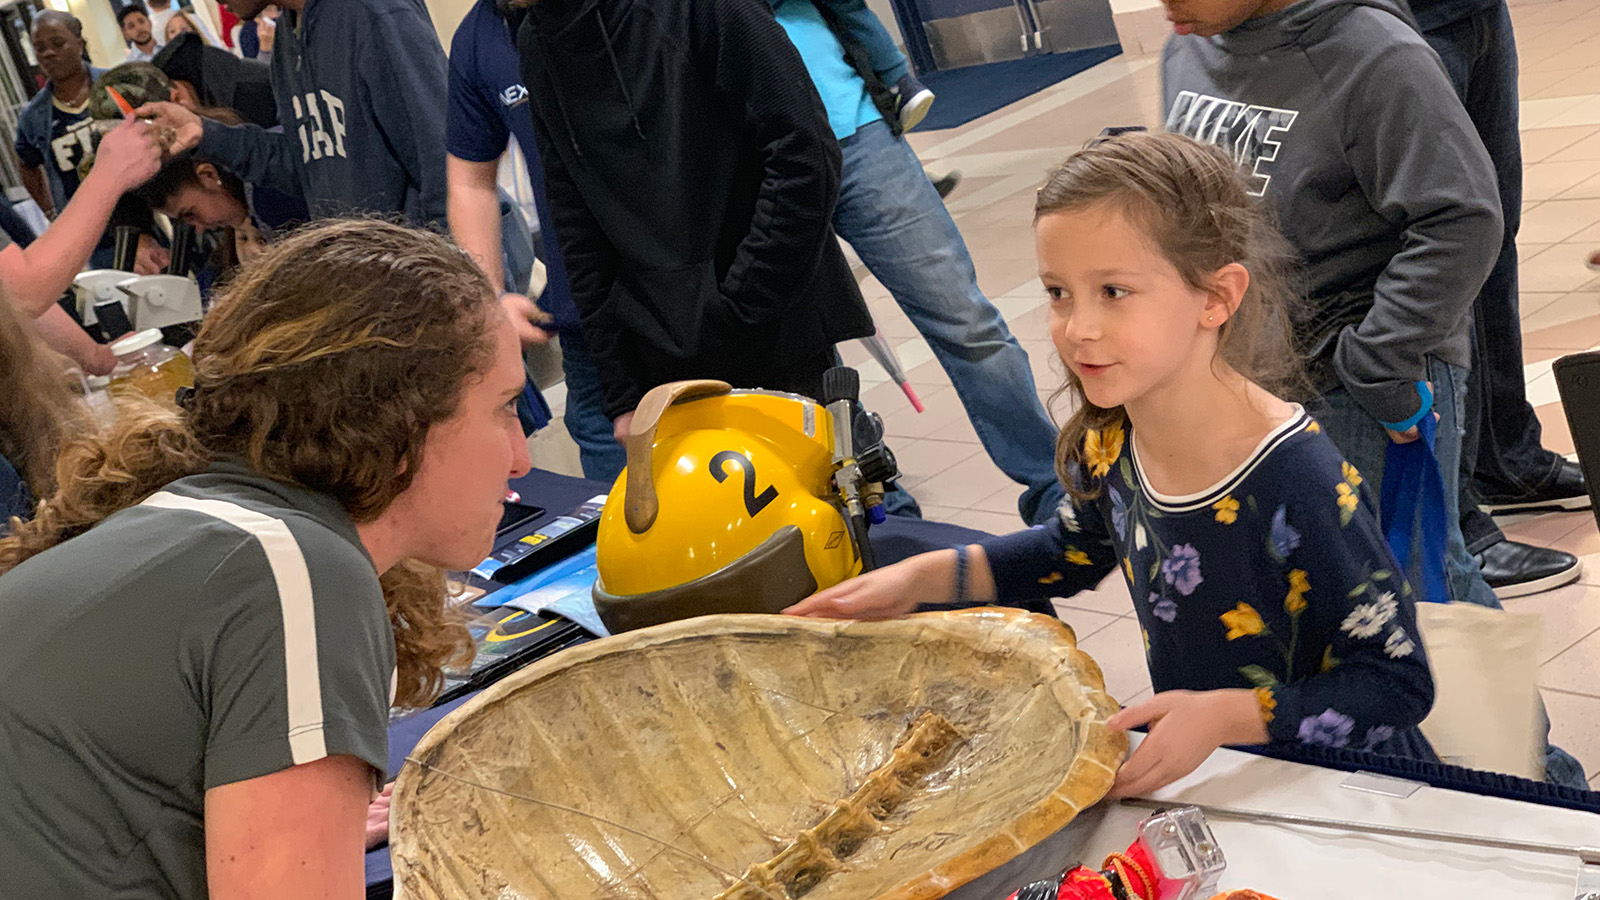 Marine scientist showing a turtle shell to a 7-year-old girl